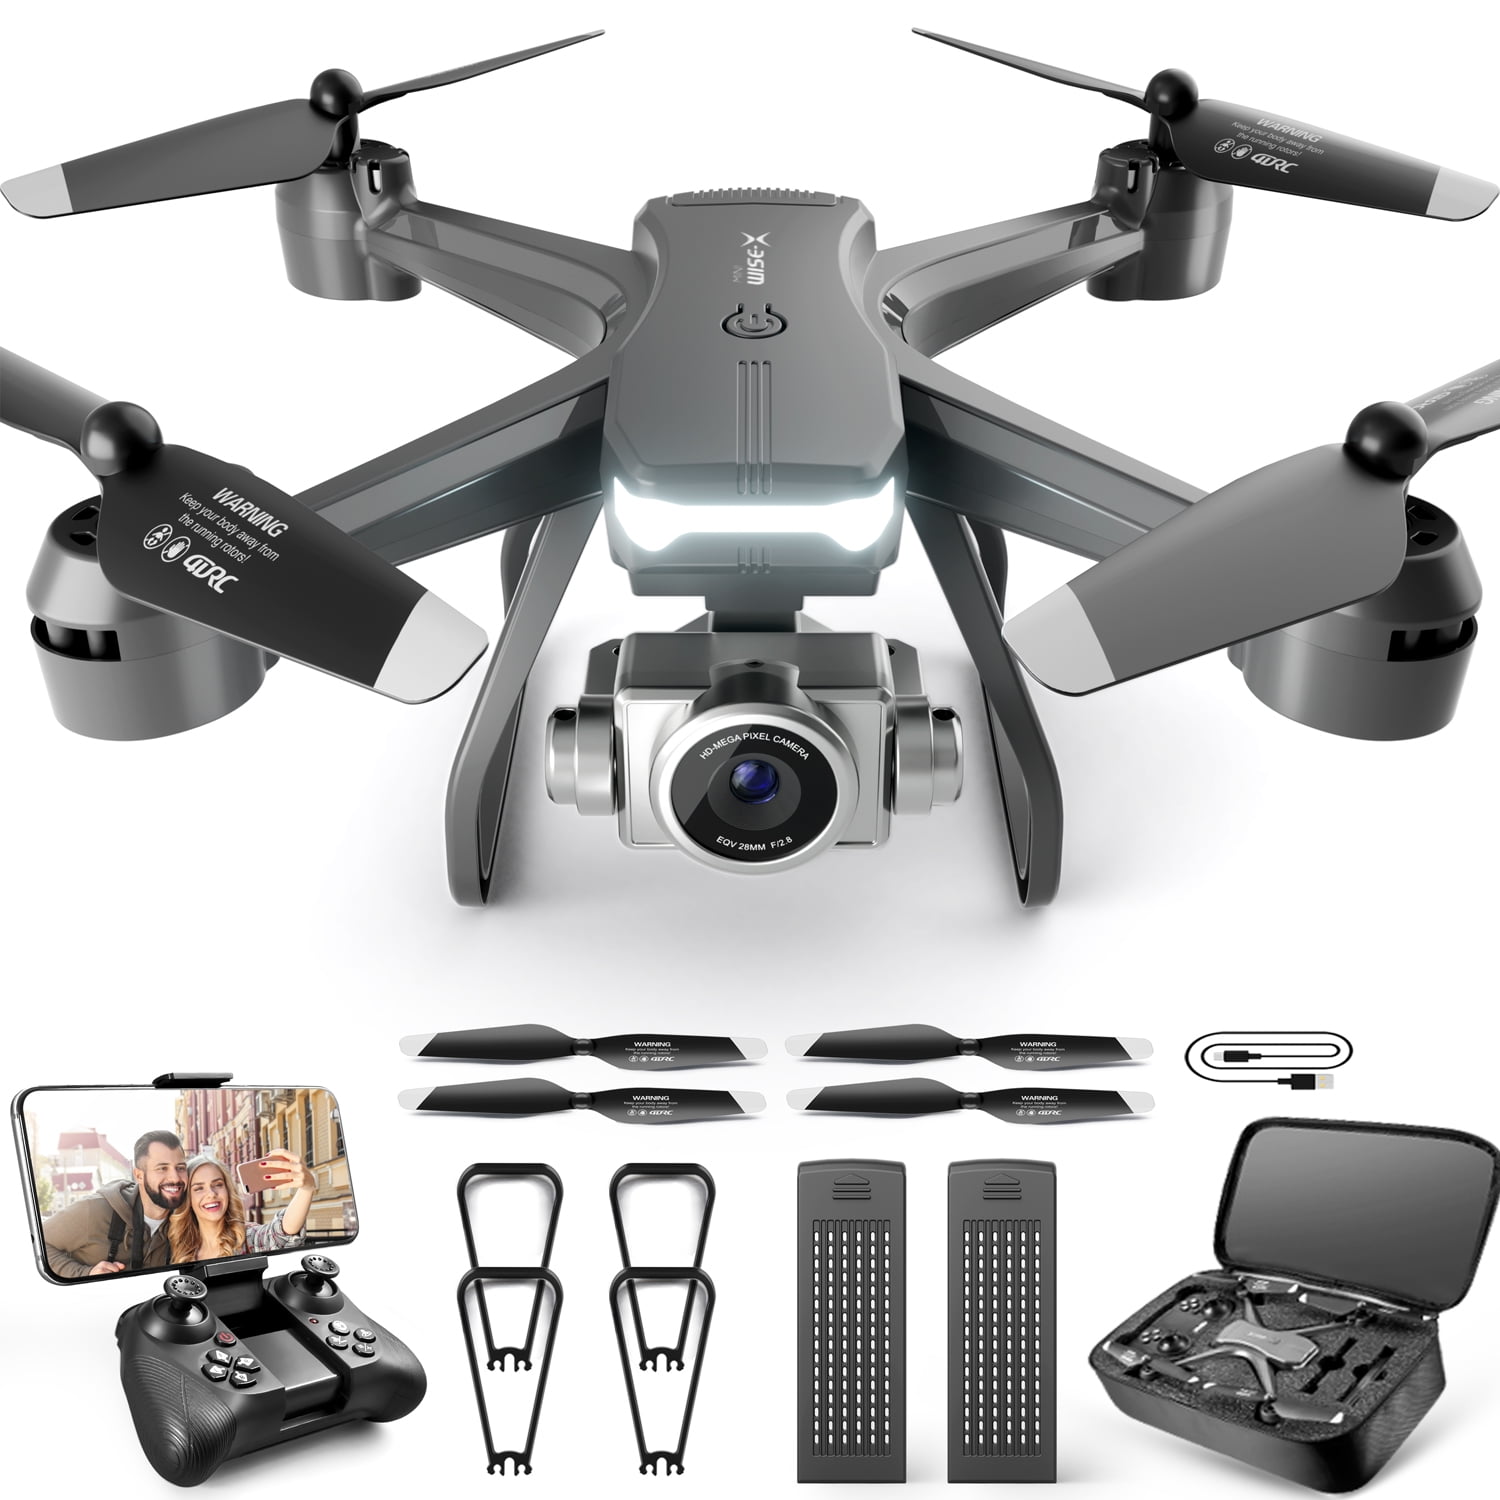 GPS WIFI Aircraft 5G Wide 4K 1080P HD video Drone Camera Quad copter Selfie